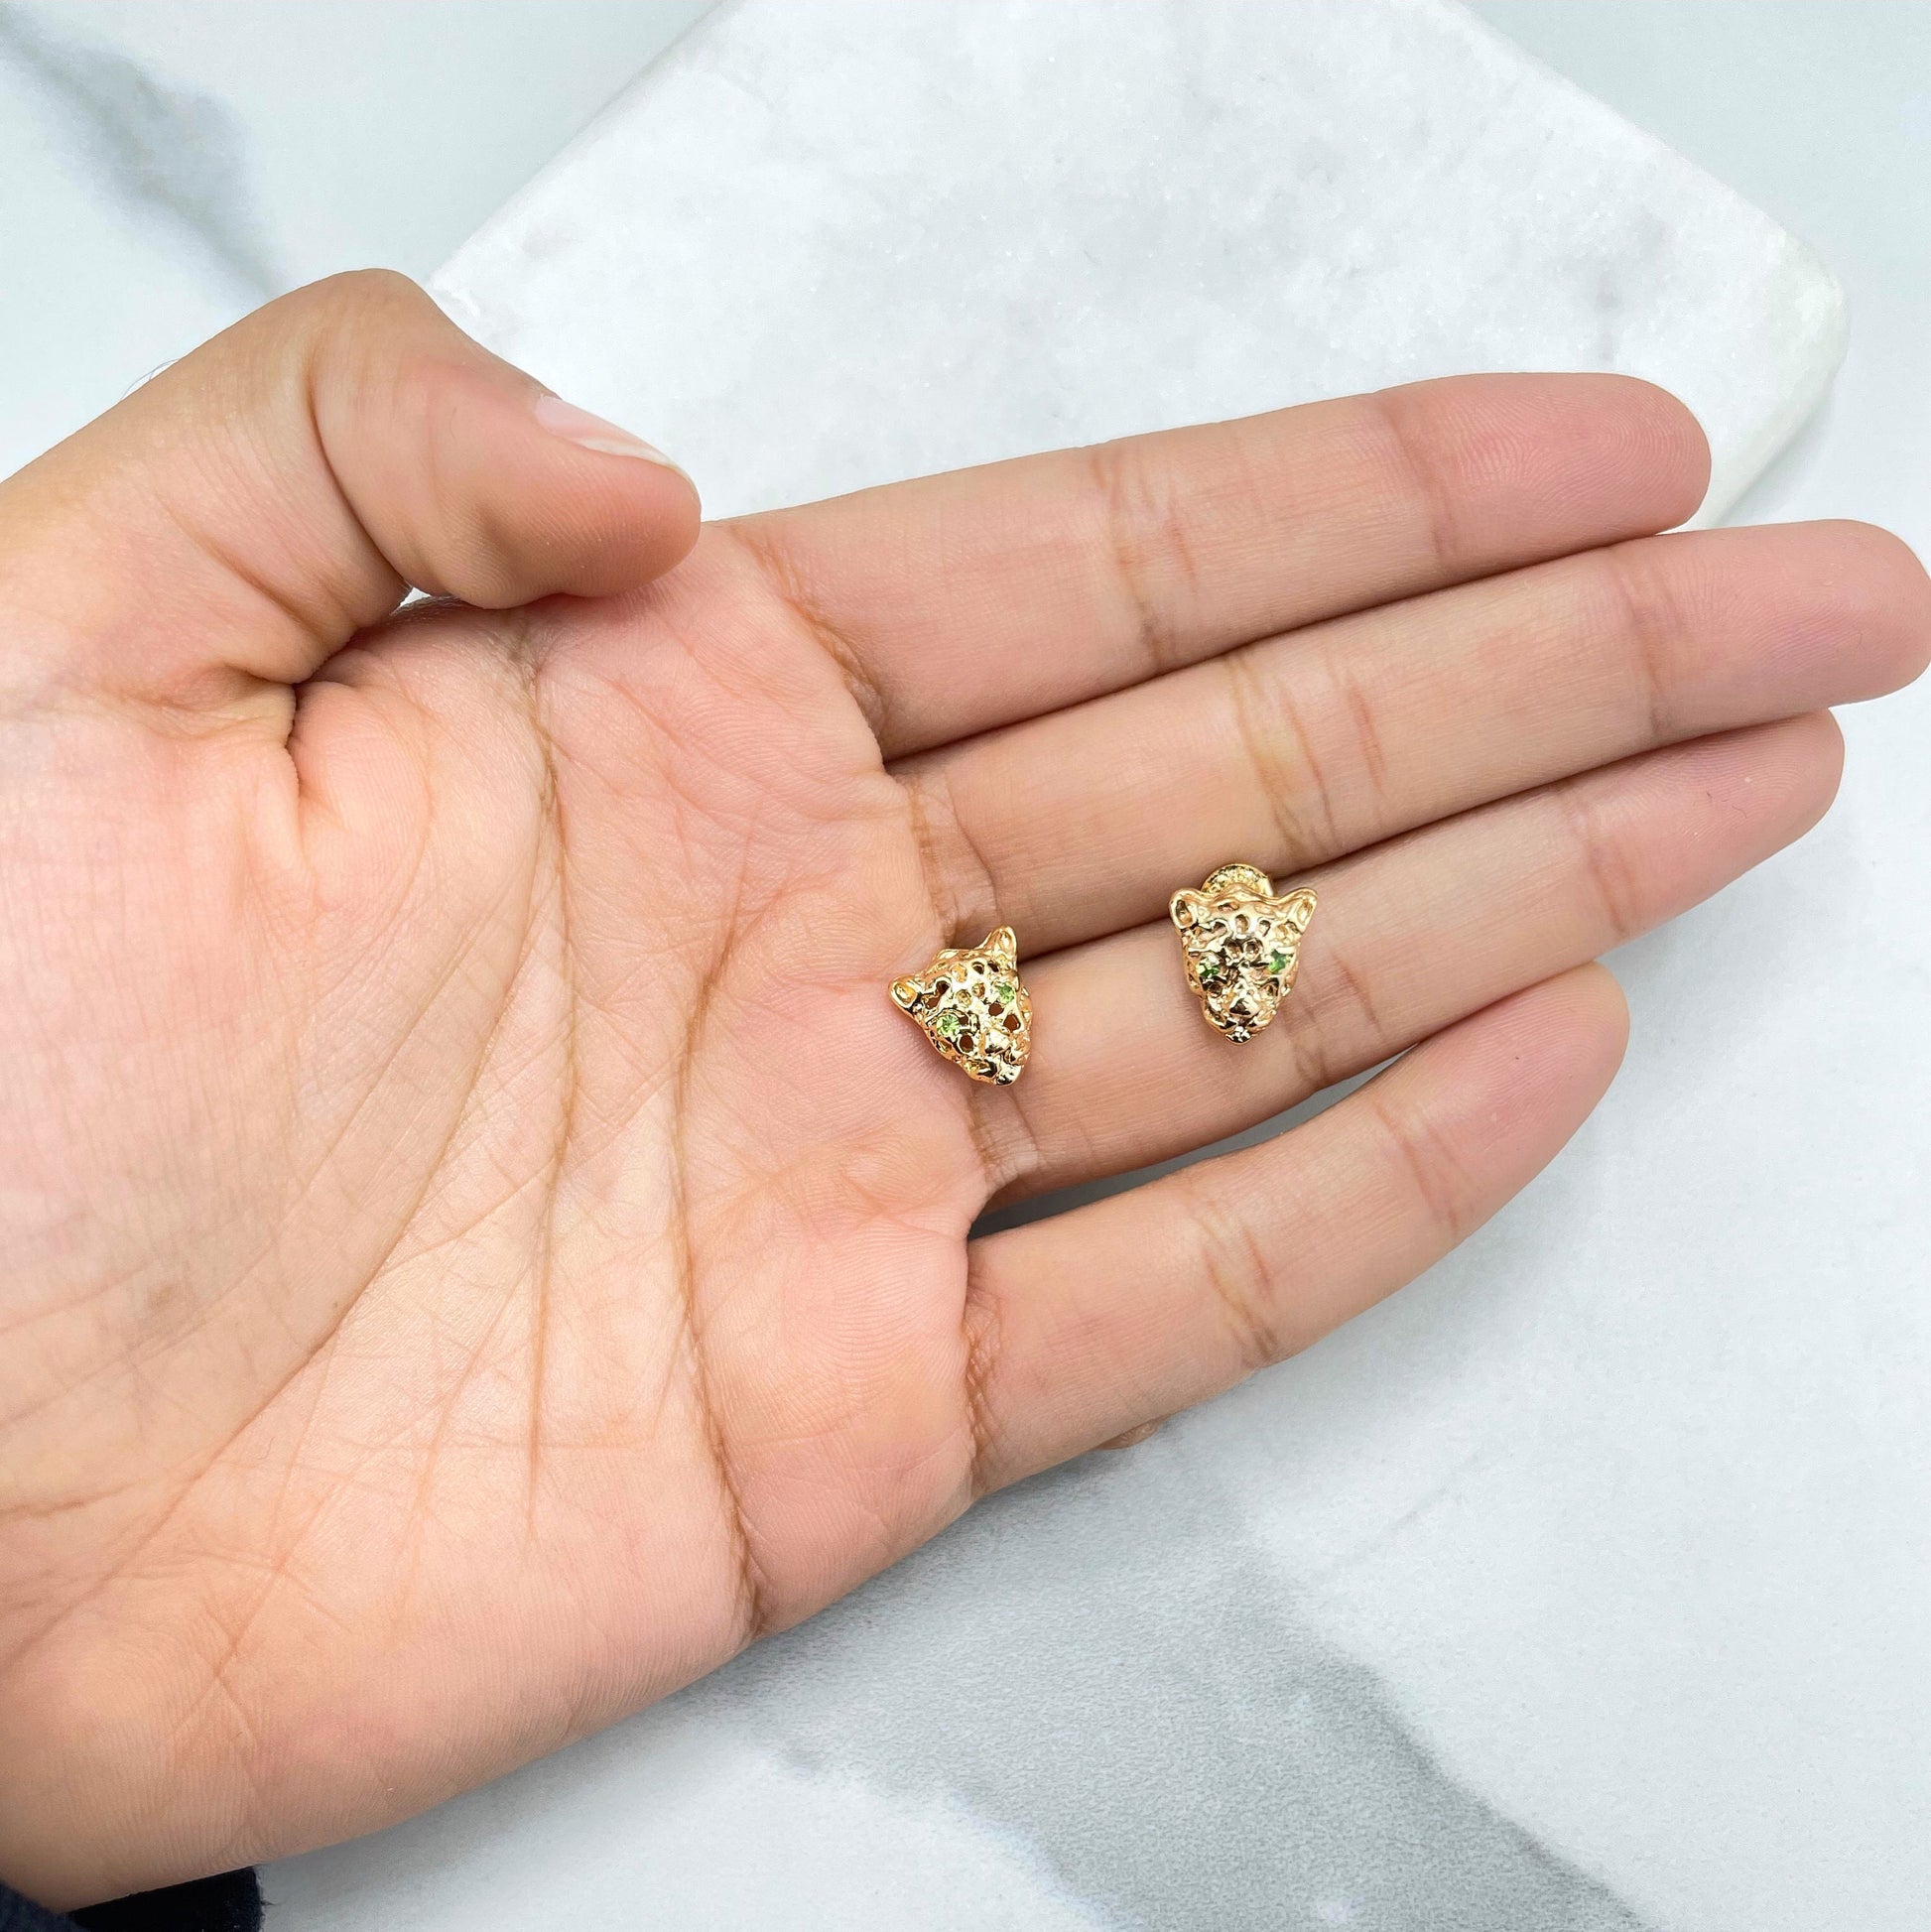 18k Gold Filled Clear Micro Cubic Zirconia Tiger Panther Shape Design with Green CZ Eyes Stud Earrings, Wholesale Jewelry Making Supplies